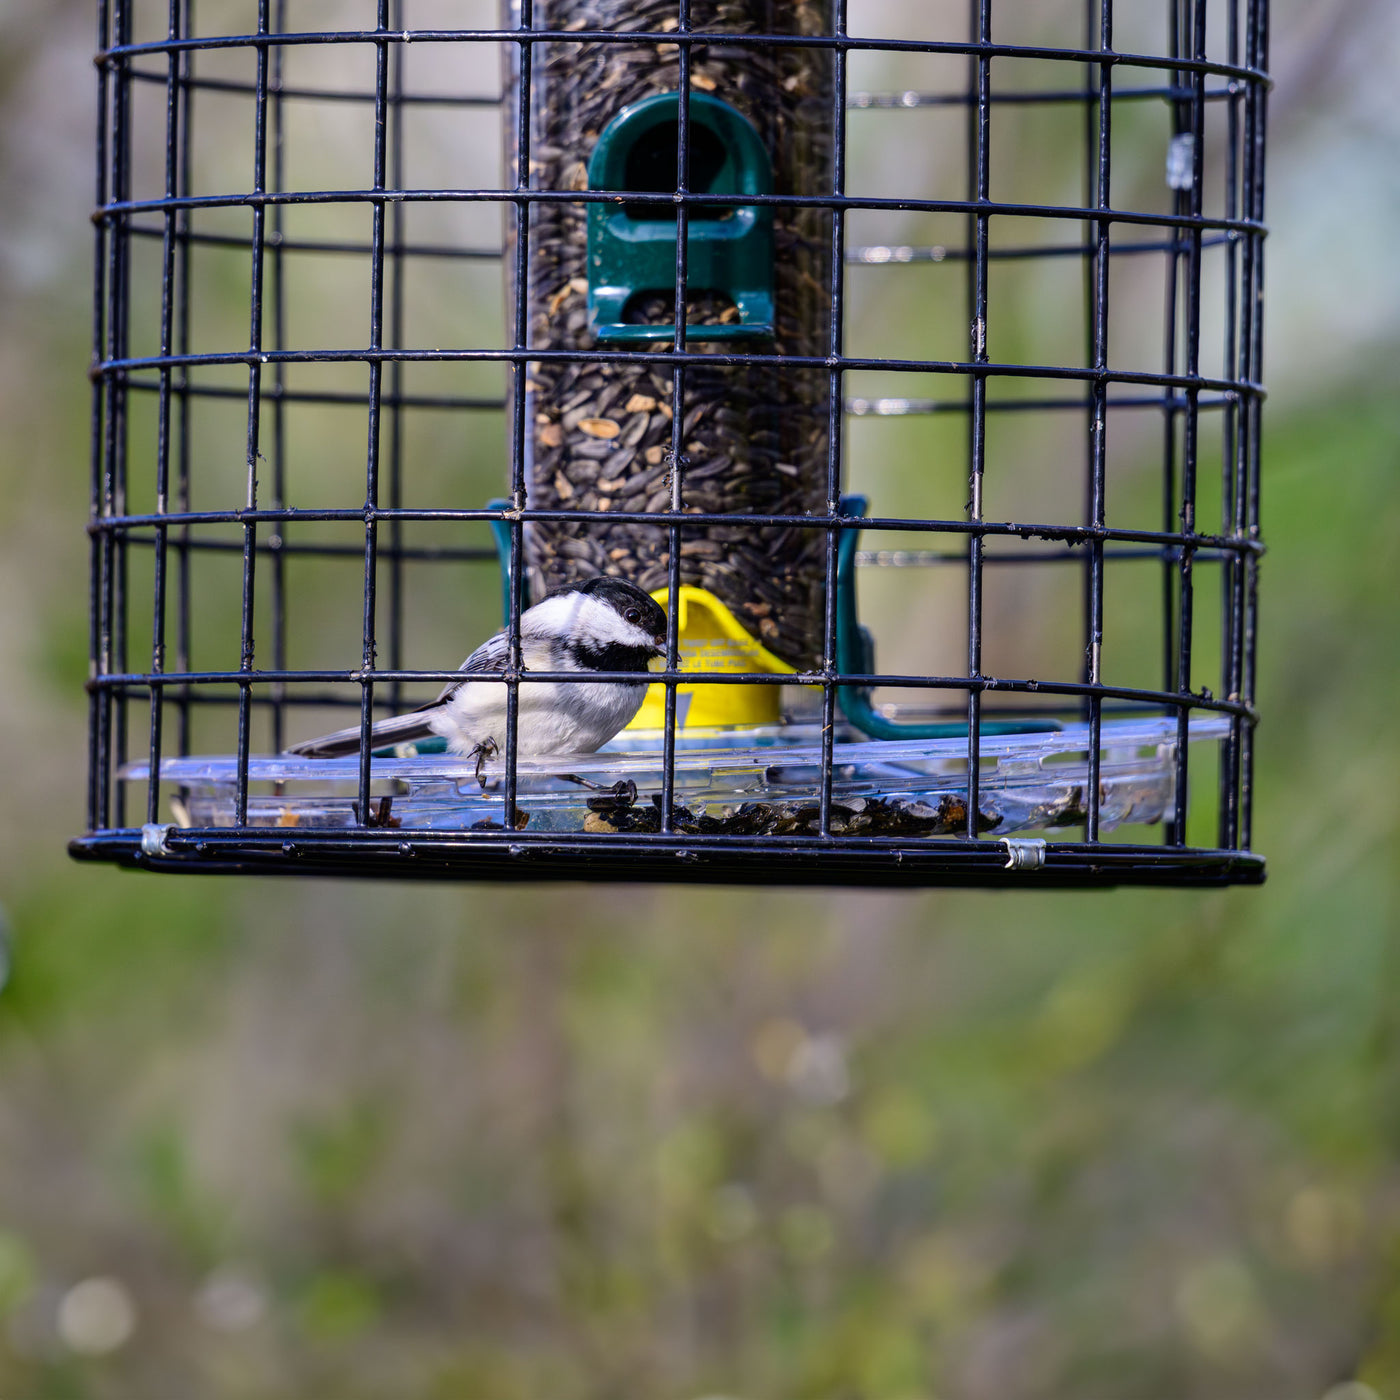 Squirrel-Proof Tube Feeder with Cage & Seed Tray